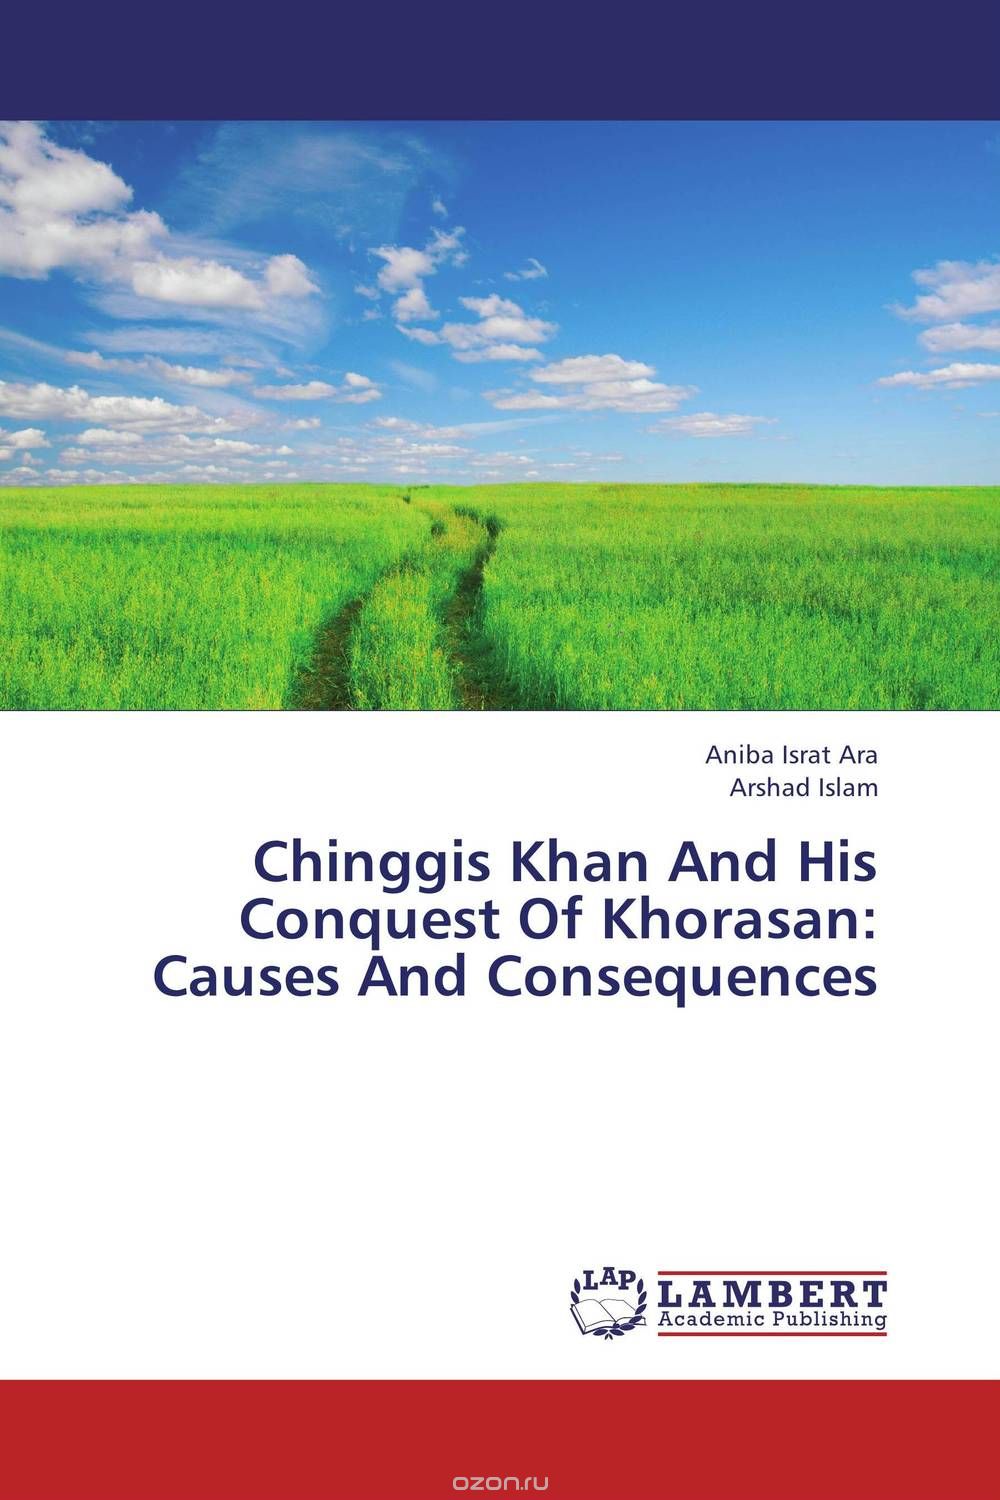 Chinggis Khan And His Conquest Of Khorasan: Causes And Consequences